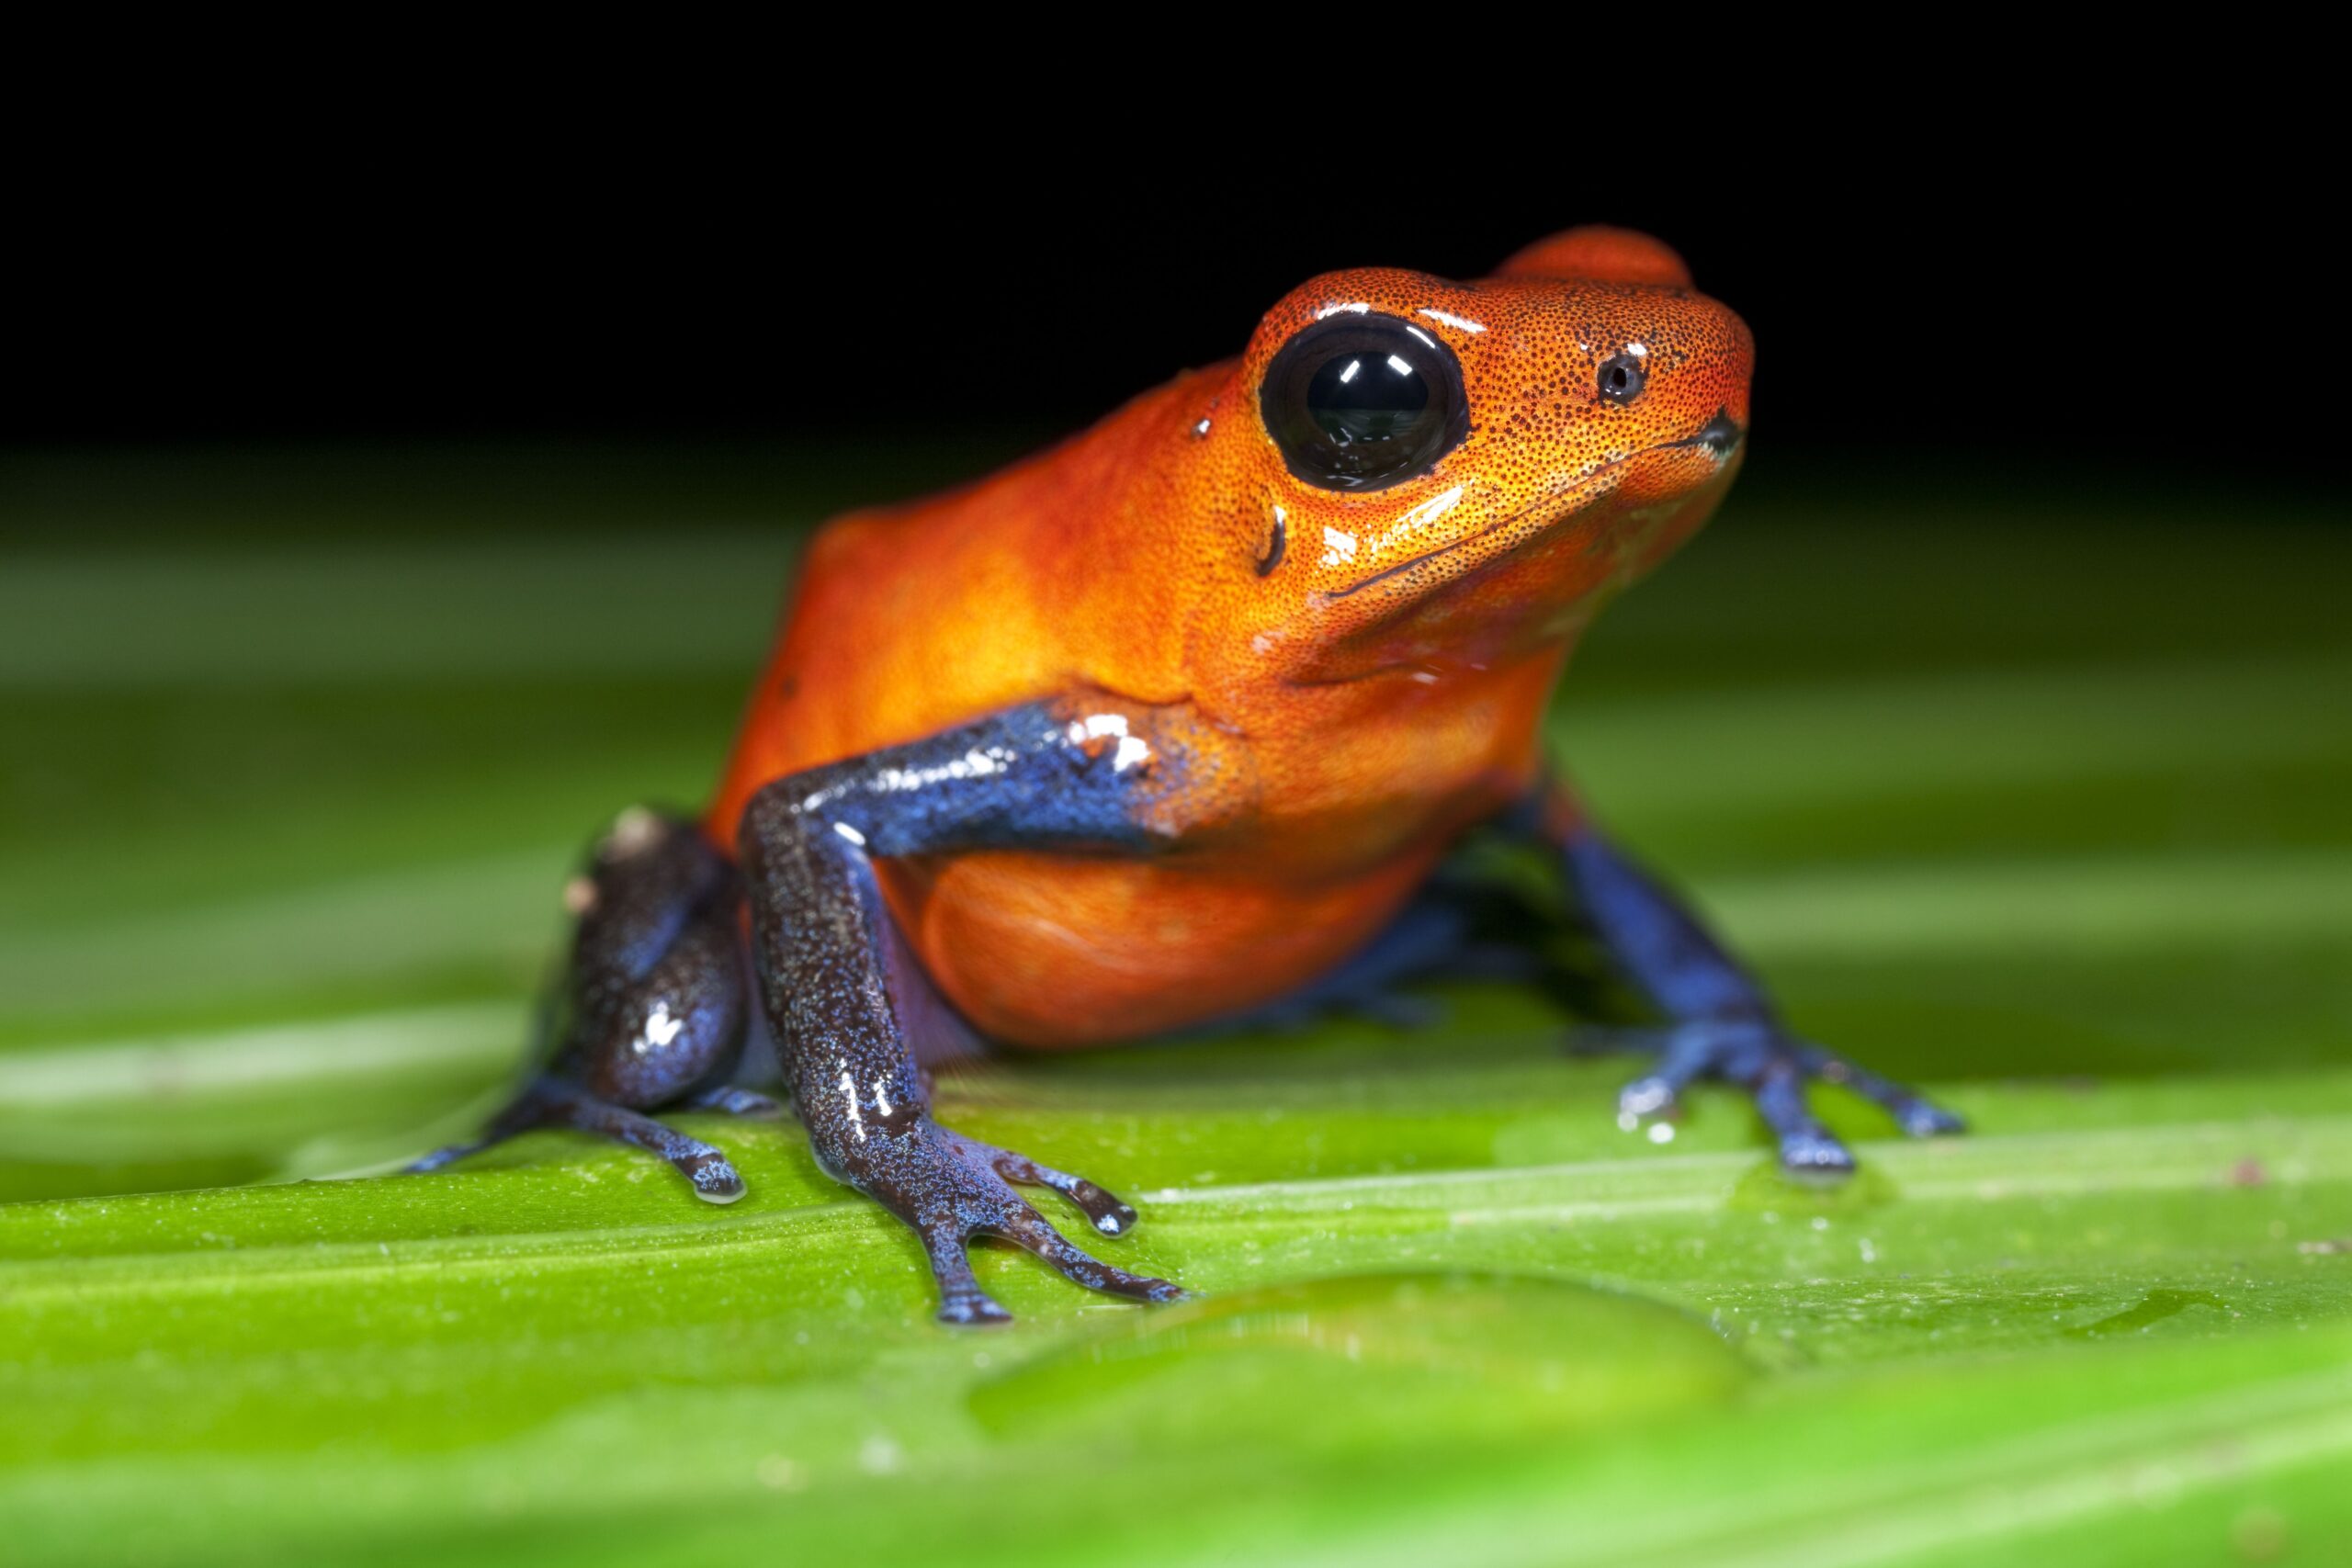 Why Animals Use Bright Colors to Warn or Attract